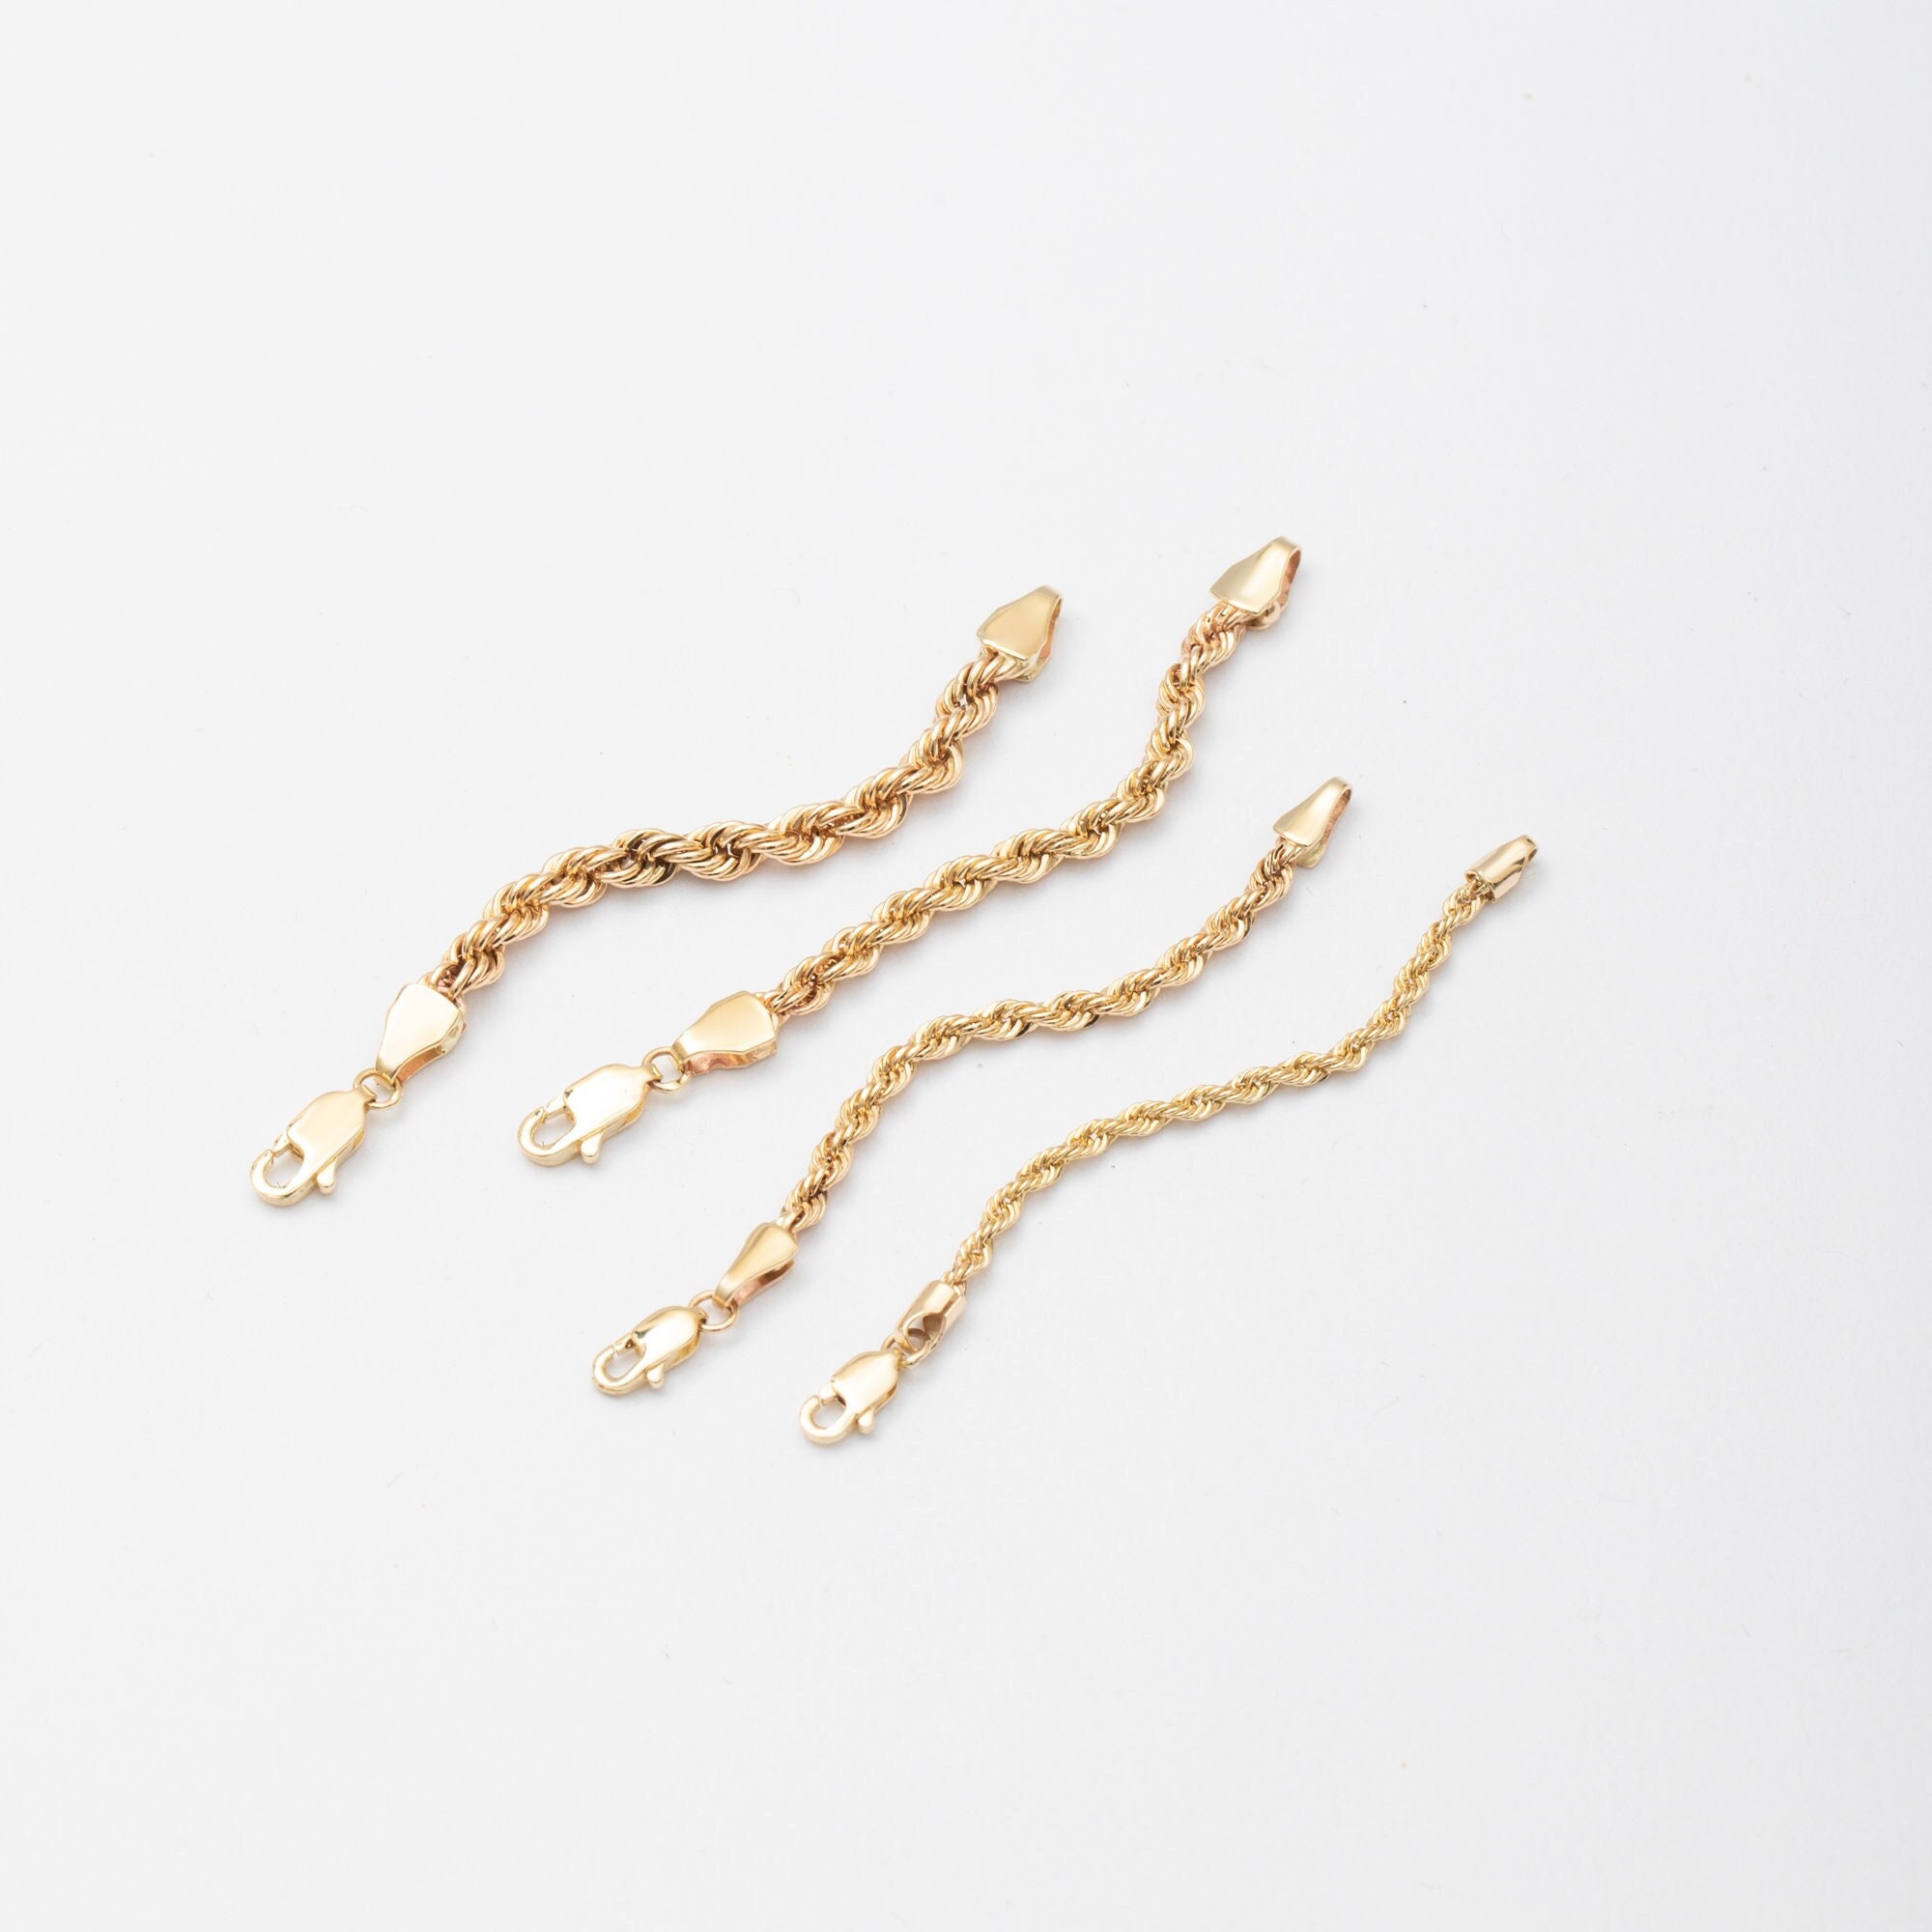 20pcs/lot 50mm/70mm 5*4mm Tone Extended Extension Tail Chain Necklace Tail  Chain Connector Findings For Bracelet Base Tray